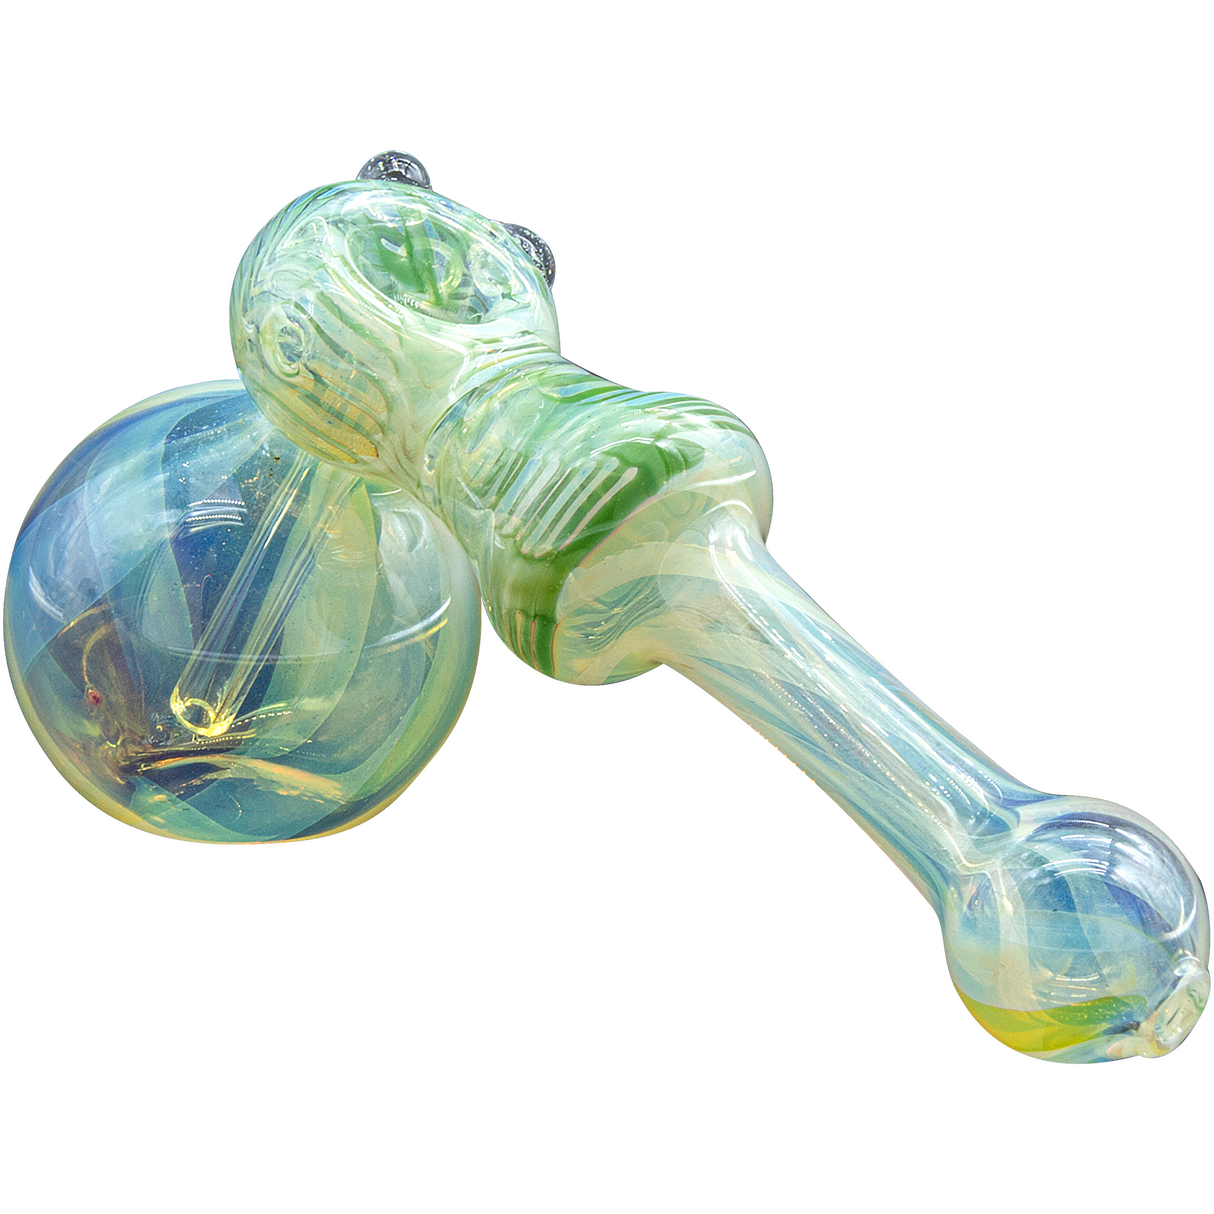 LA Pipes "Raked Hammer" Fumed Hammer Bubbler Pipe in Green, Side View on White Background